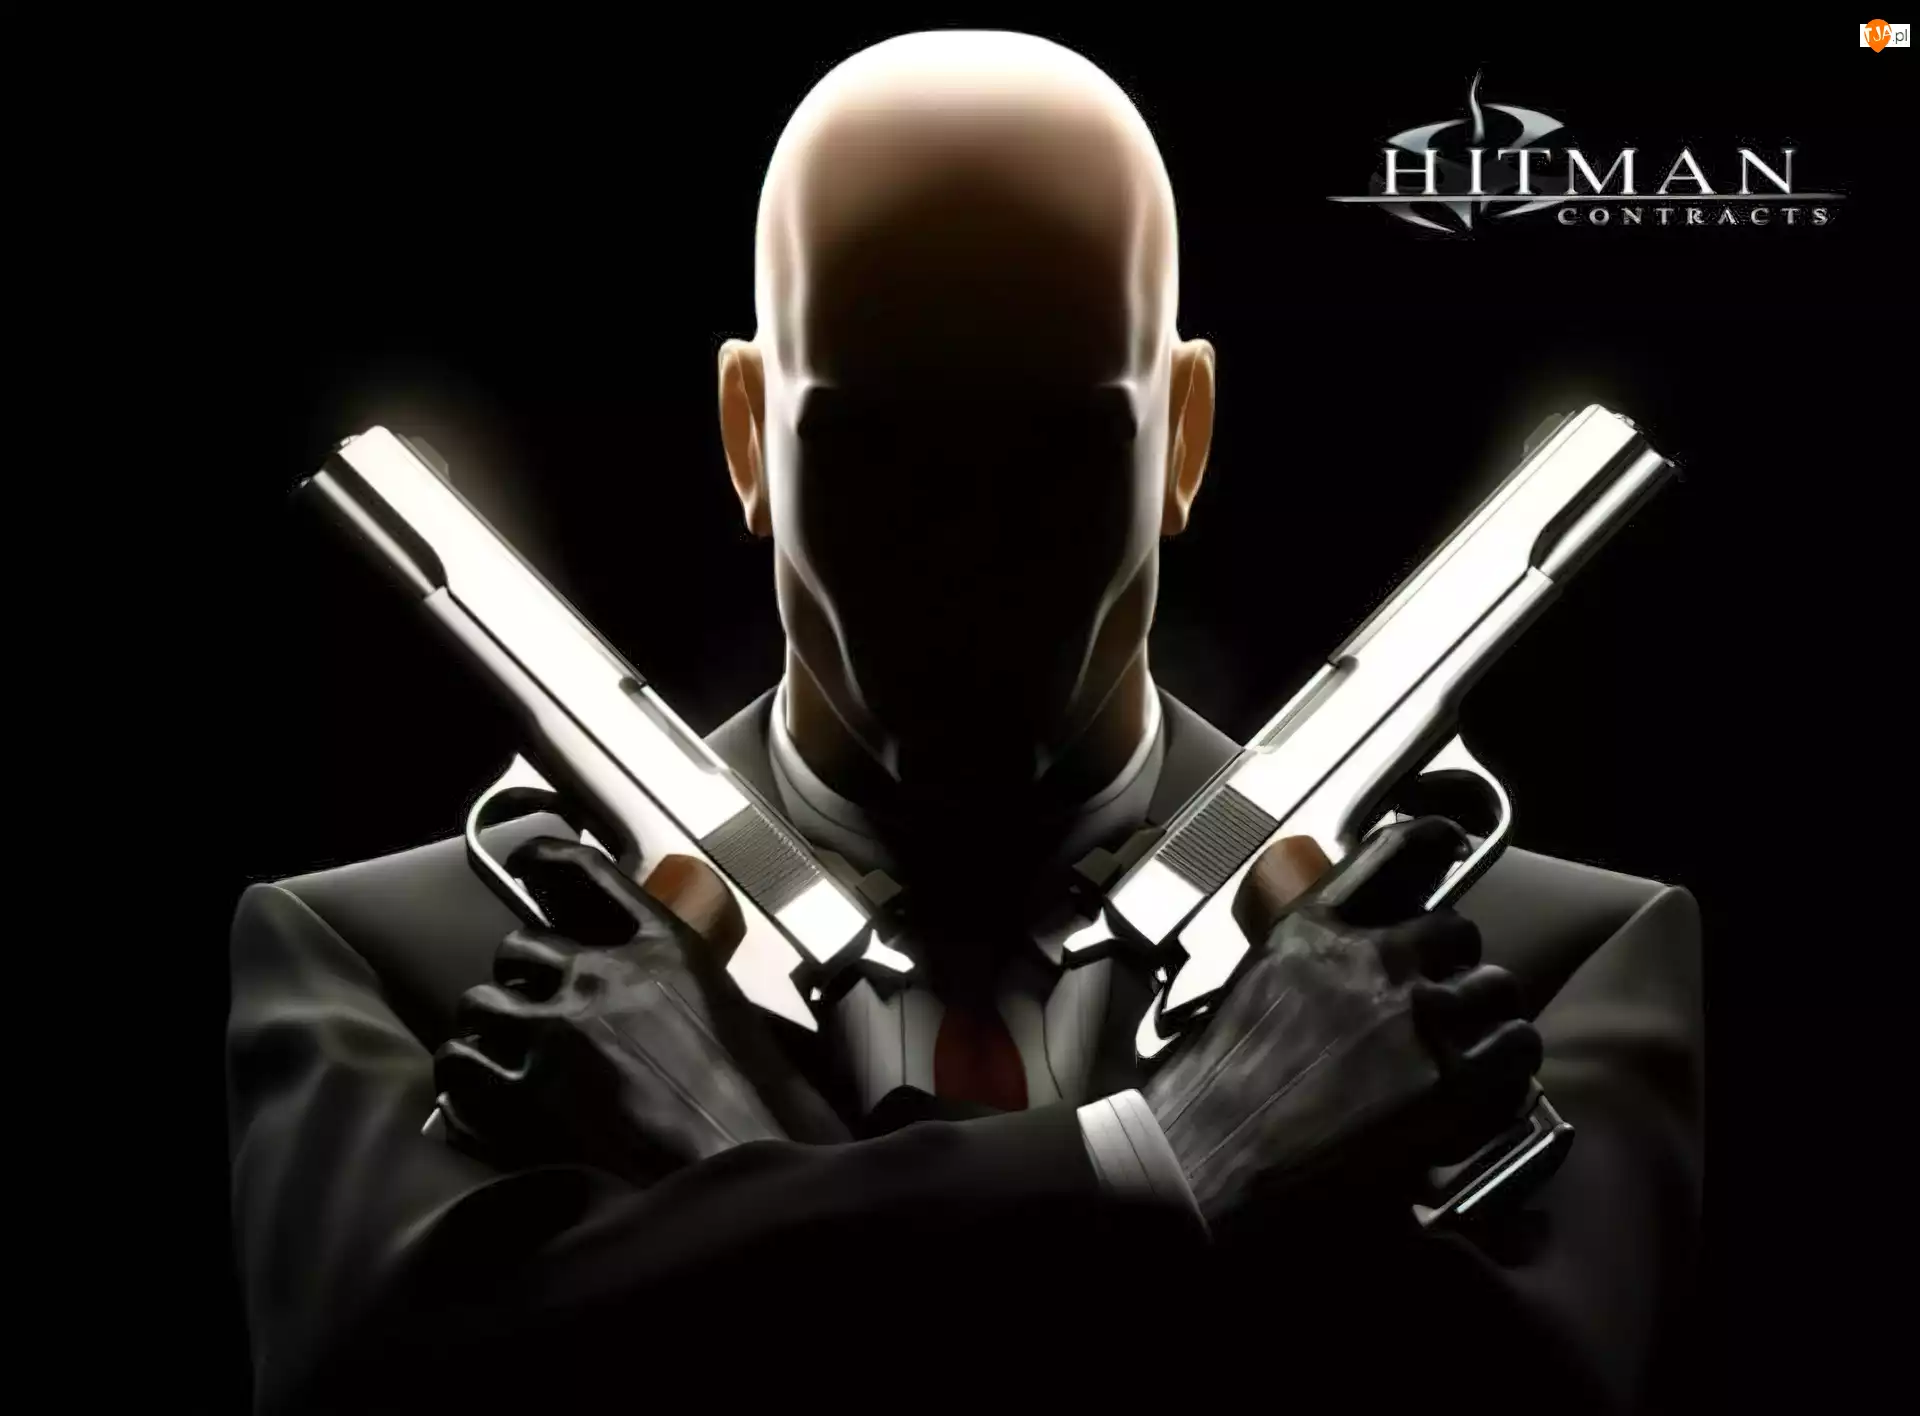 Pistolety, Hitman Contracts, Cień